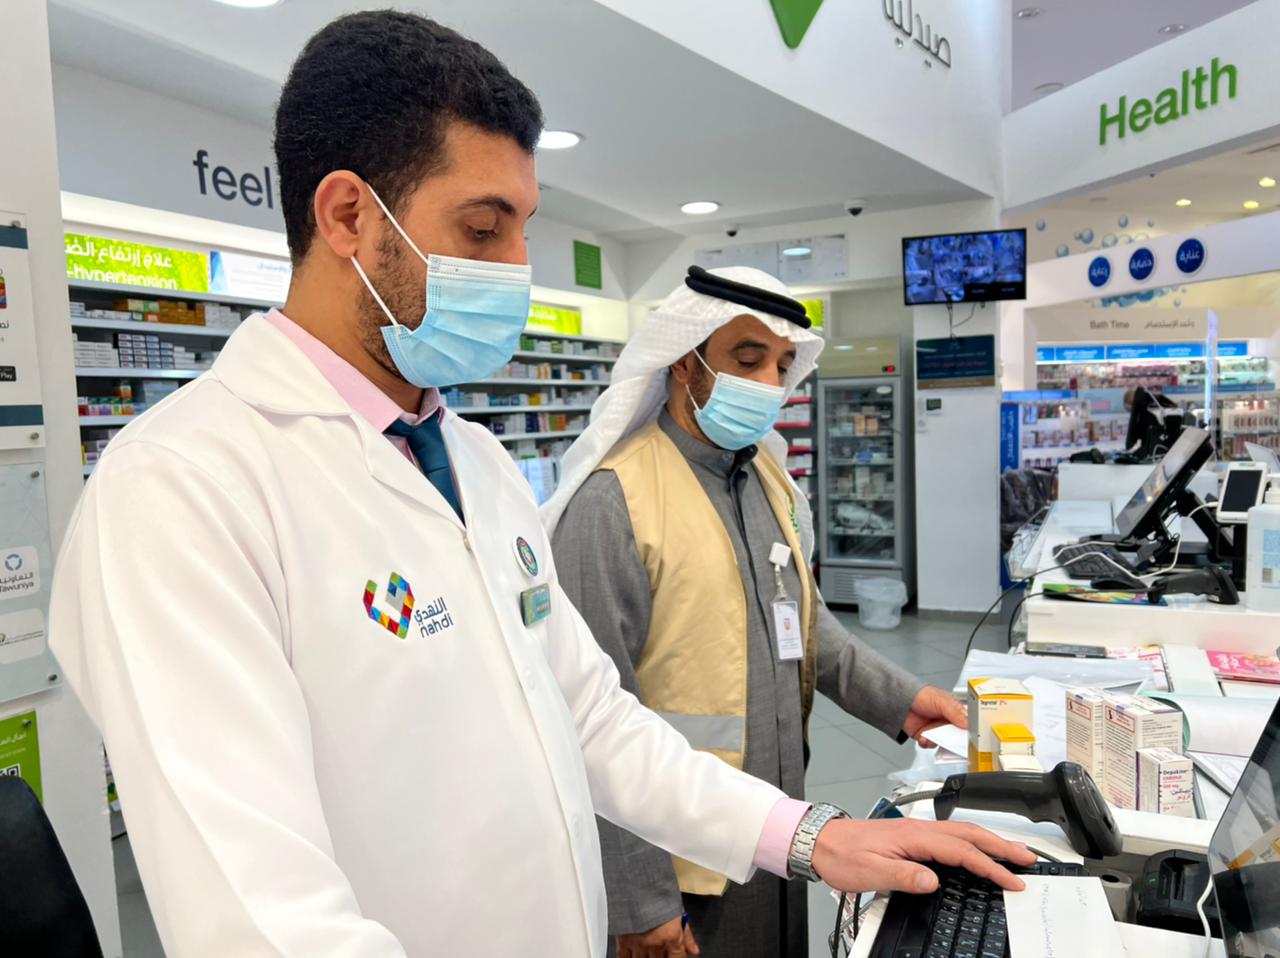 The Eastern Region: 100+ Supervisory Tours Conducted on Private Pharmacies in 3 Months